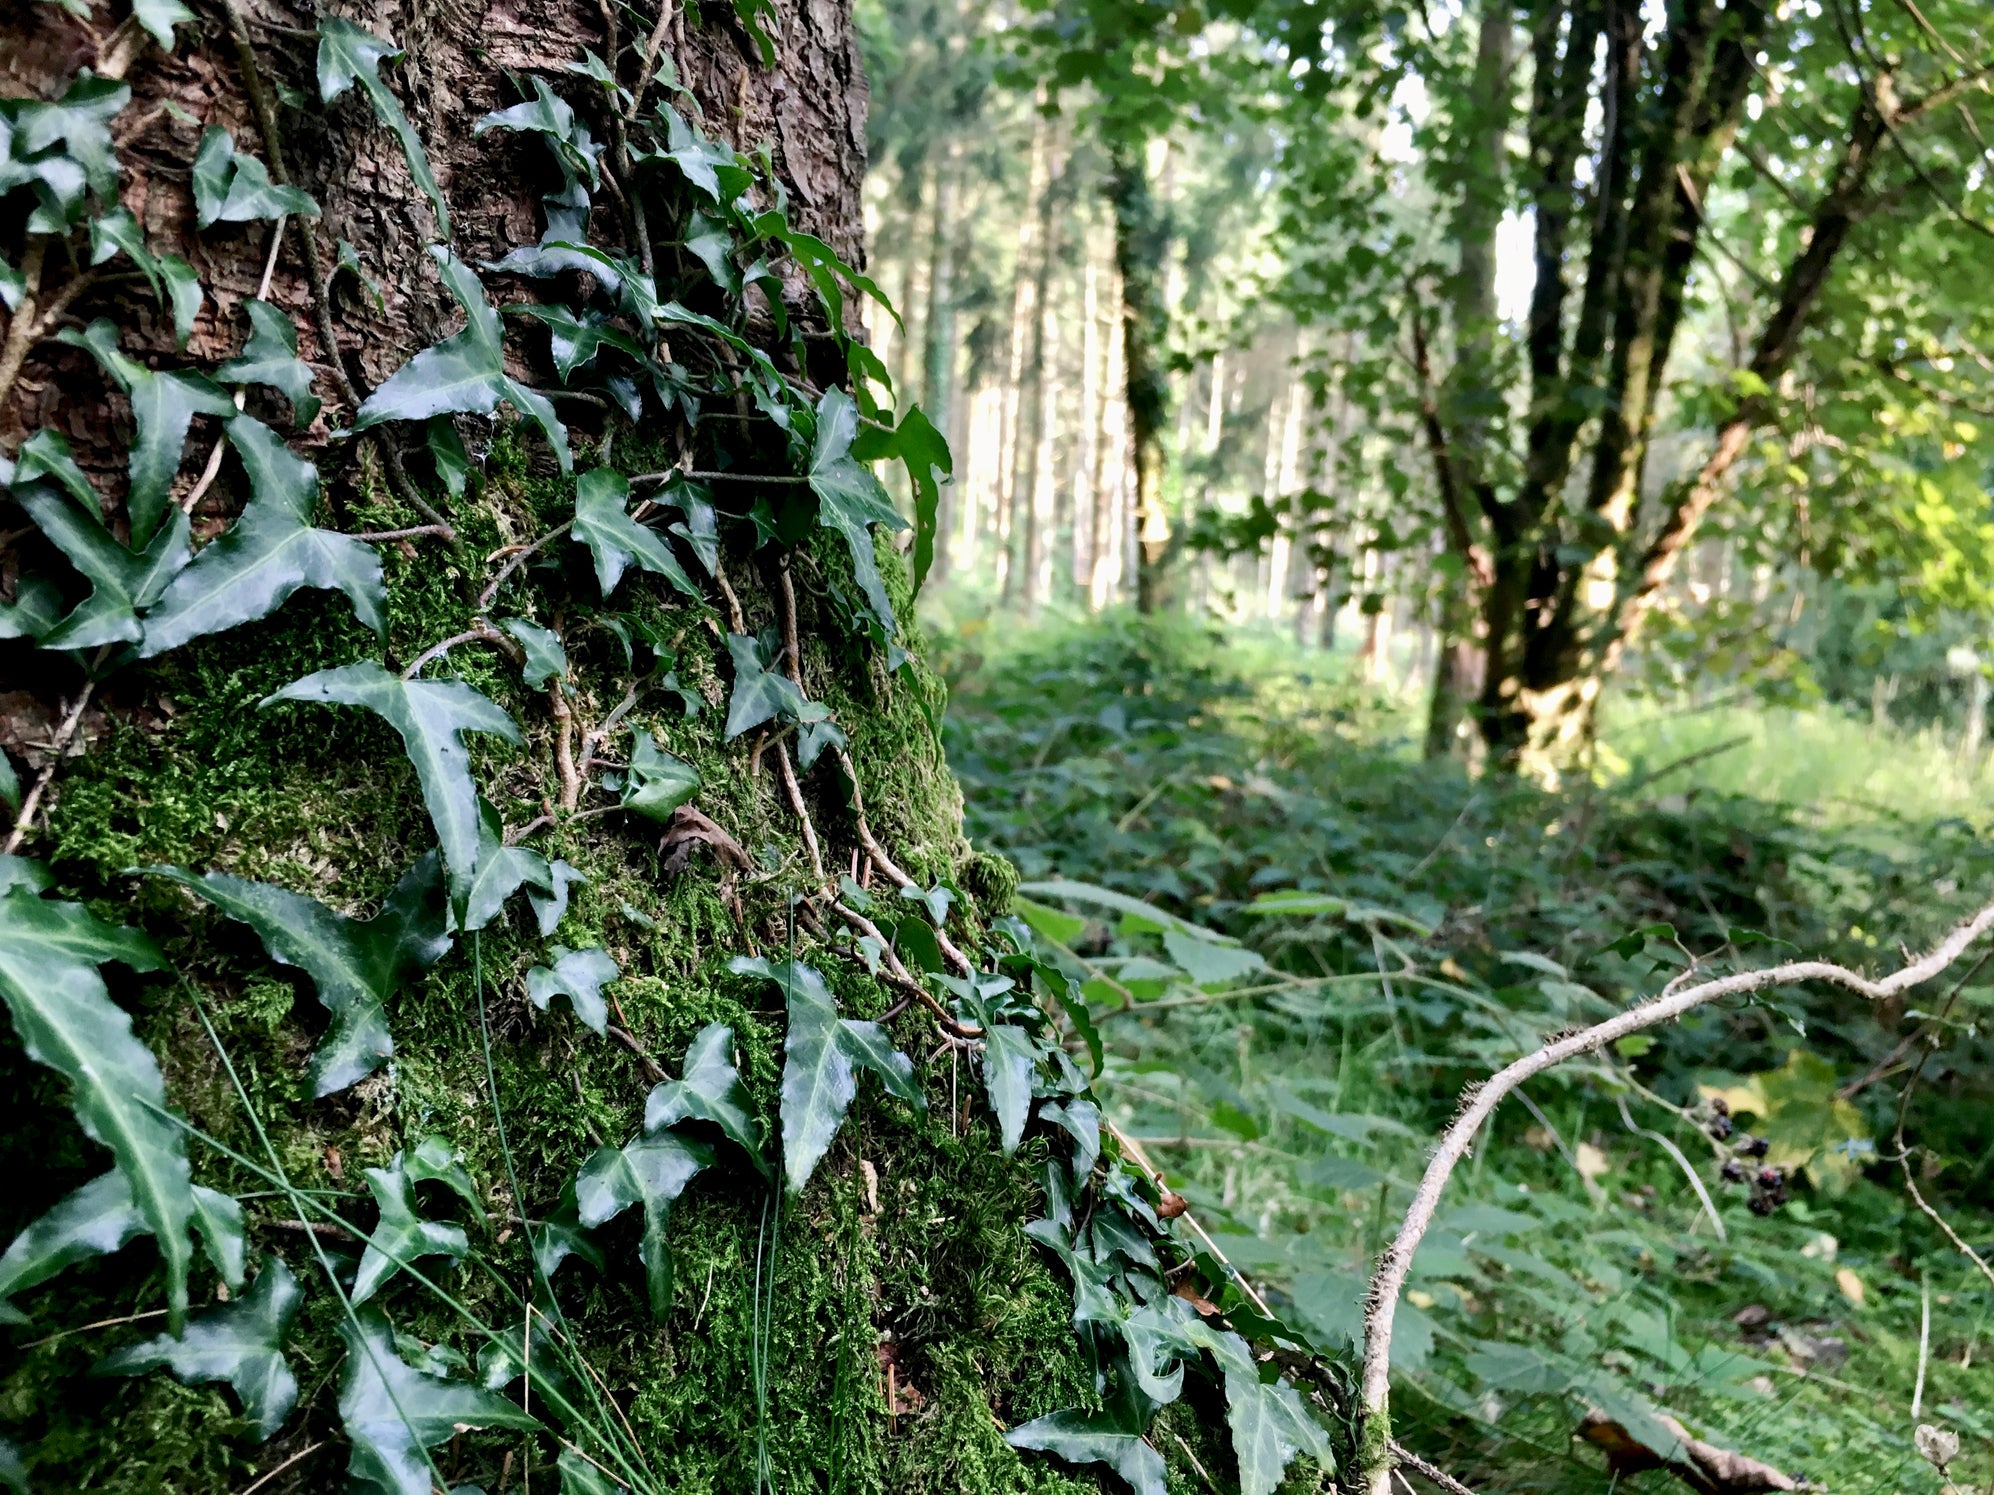 Levels of ivy in European forests are surging, research shows